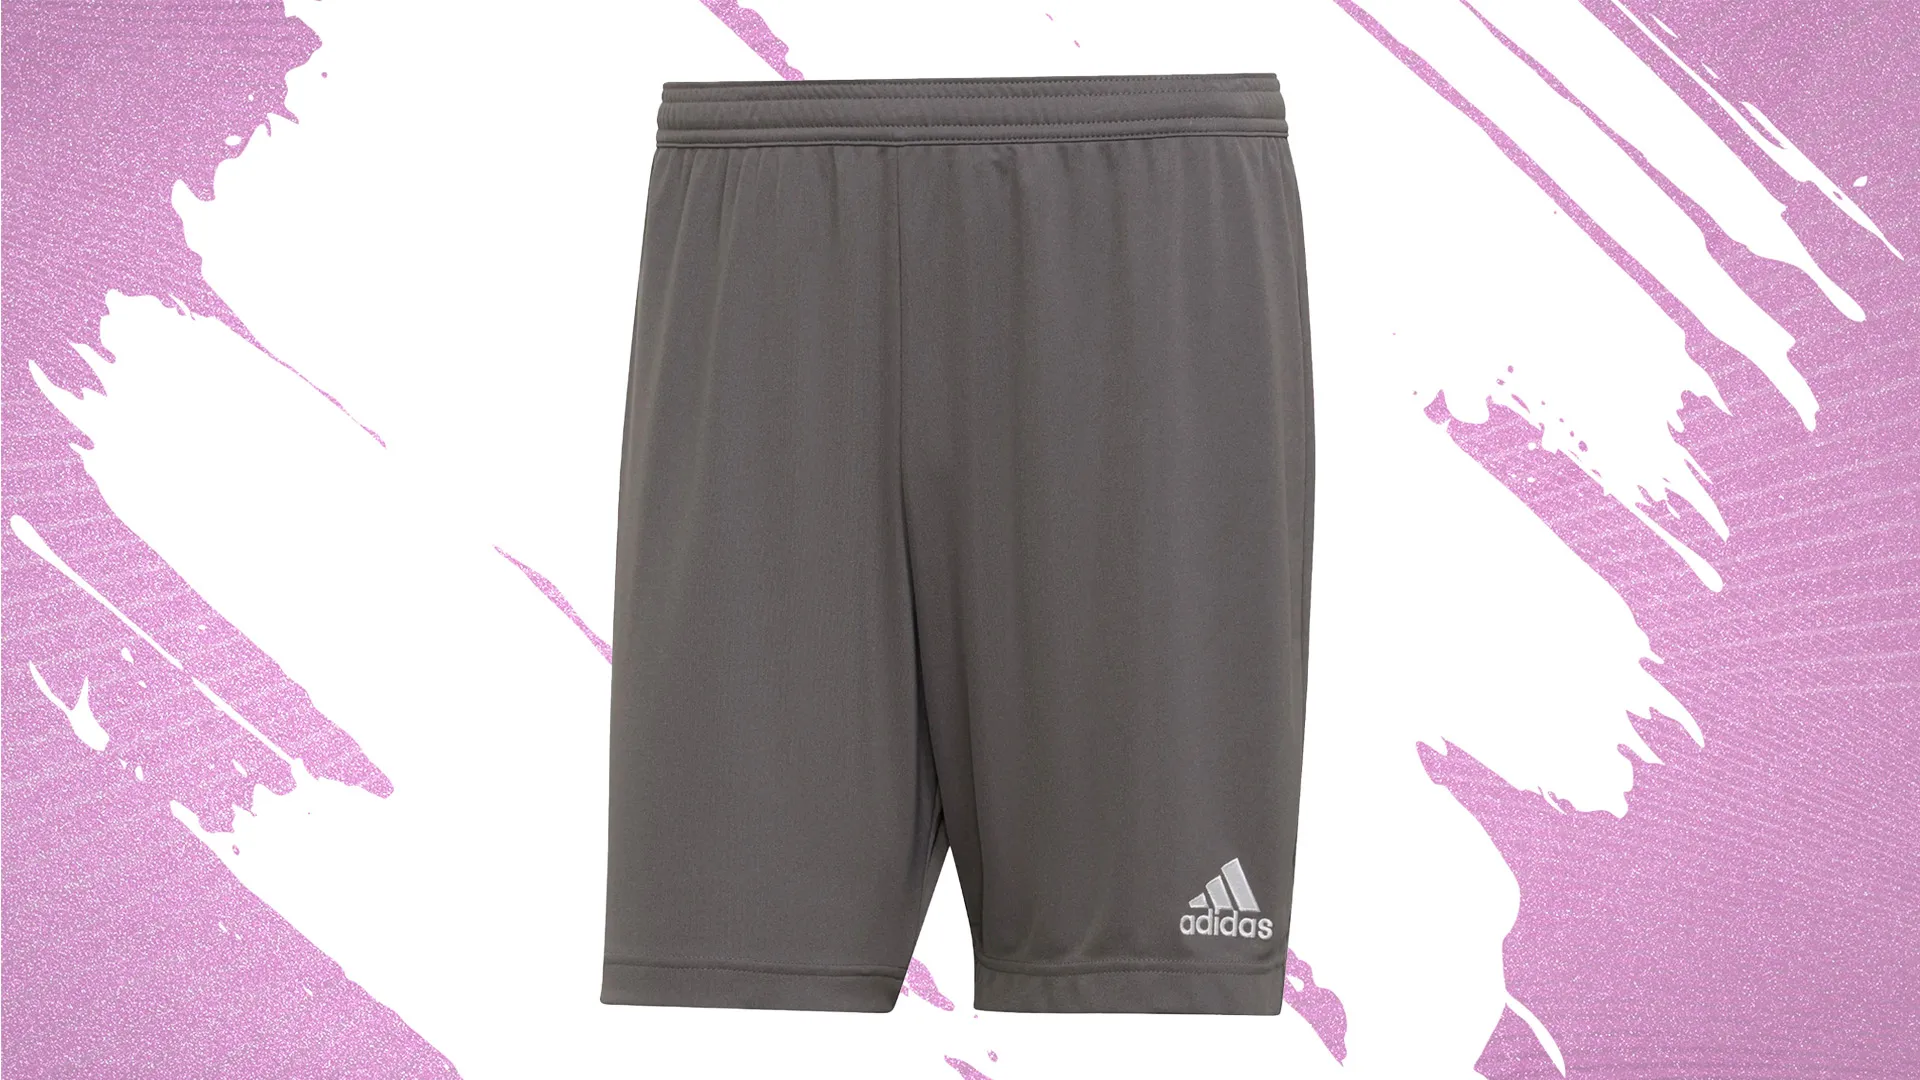 The best men's football shorts you can buy in 2022